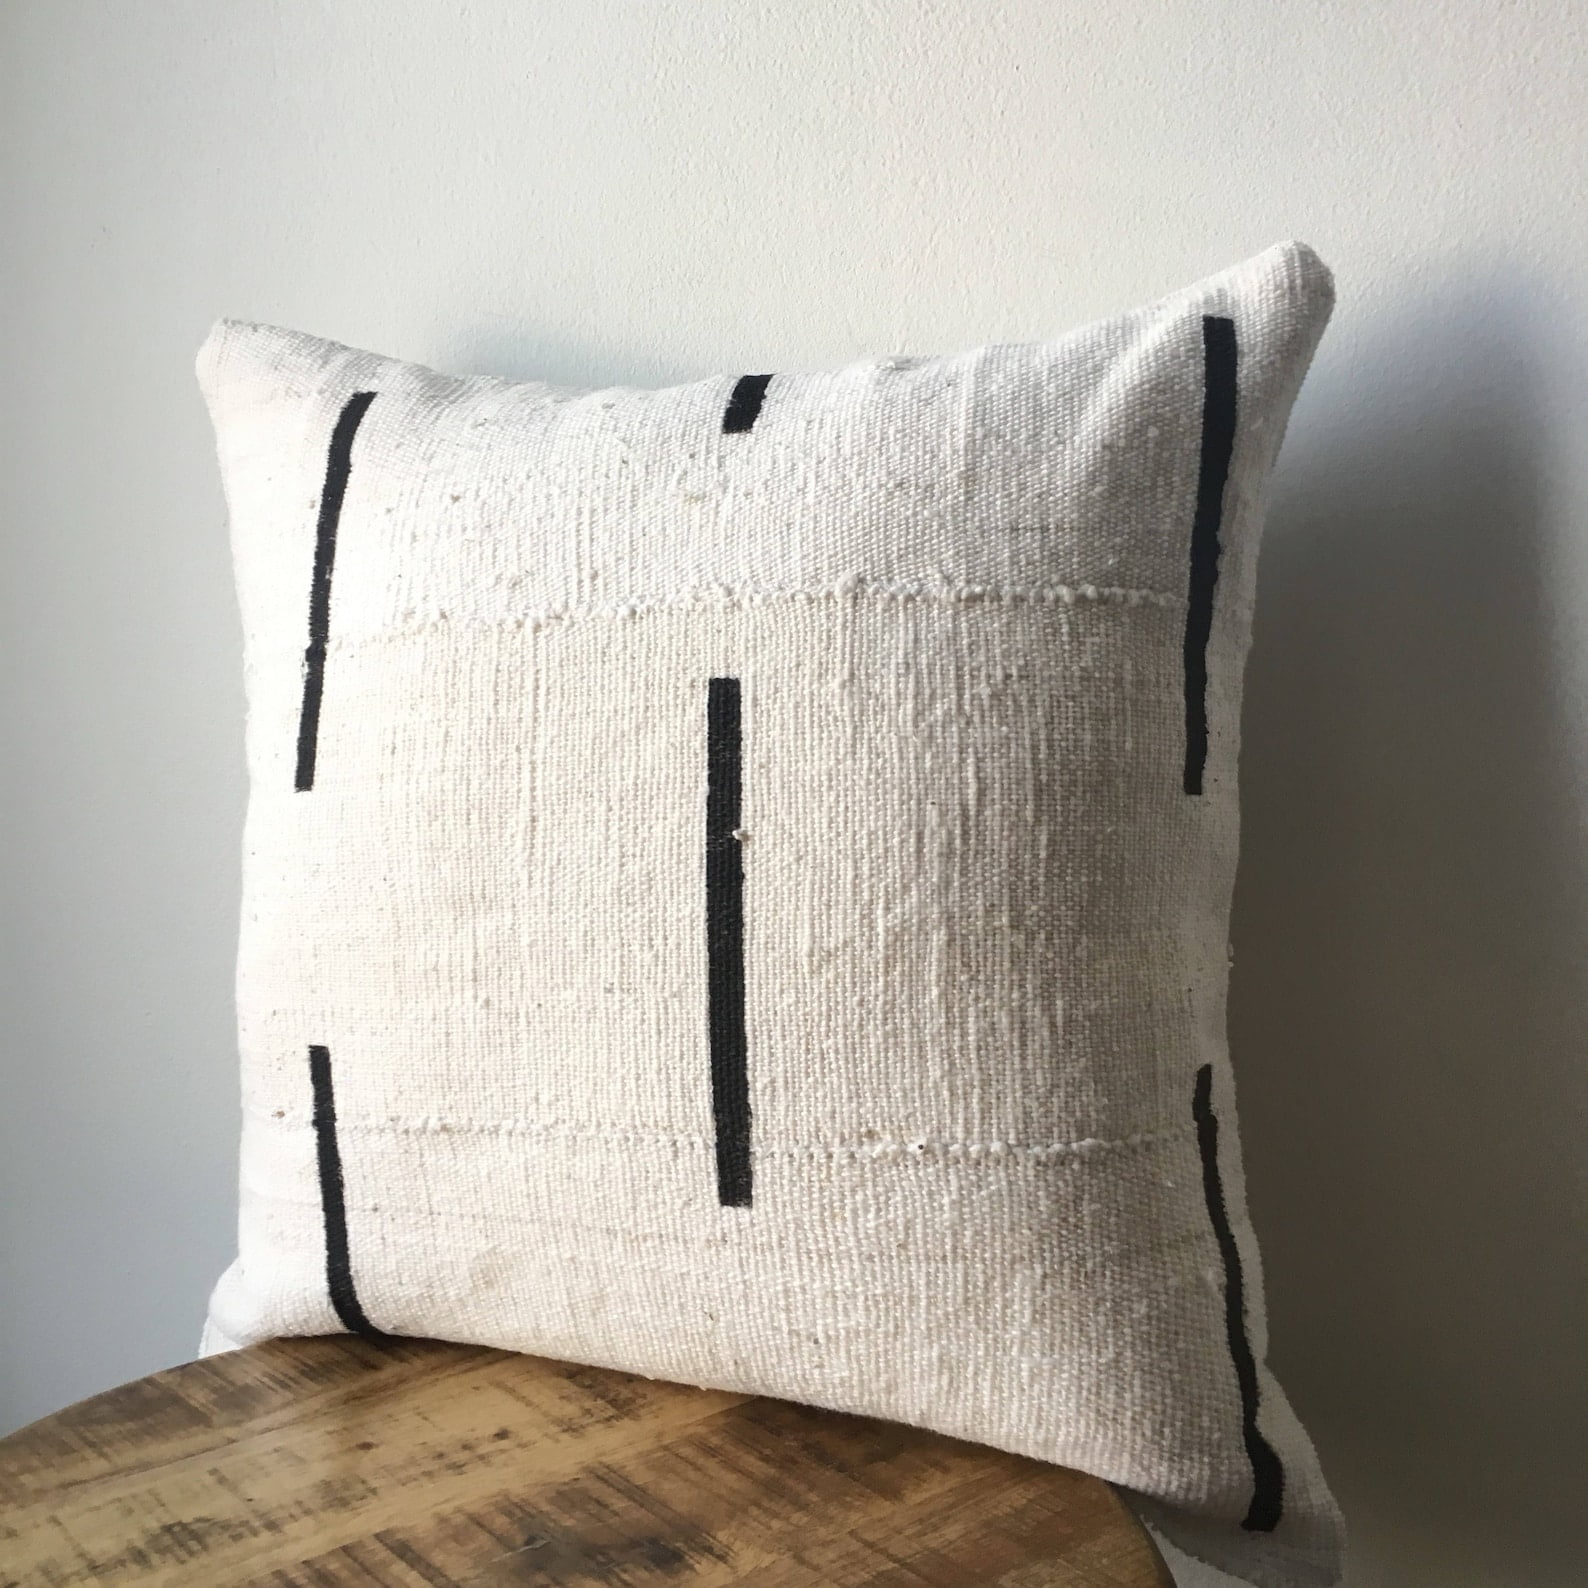 black and white couch pillows - DOUBLE SIDED with Insert - White with Black Dashed Lines 